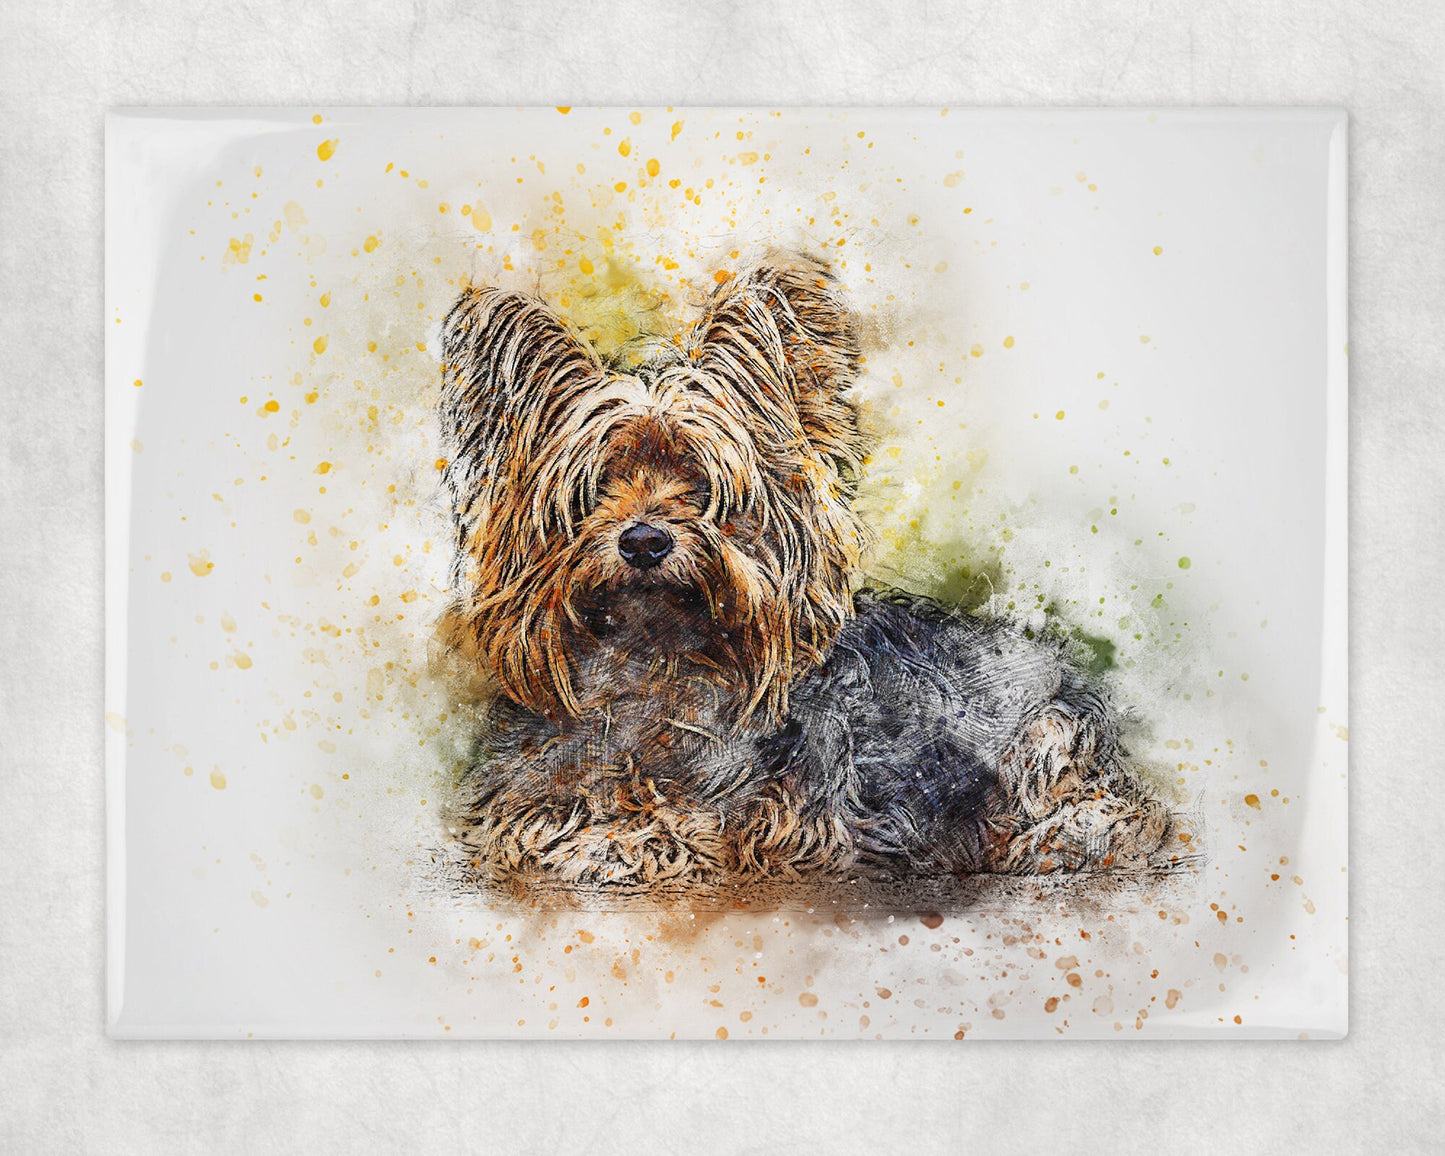 Watercolor Style Yorkie Art Decorative Ceramic Tile with Optional Easel Back - 6x8 inches